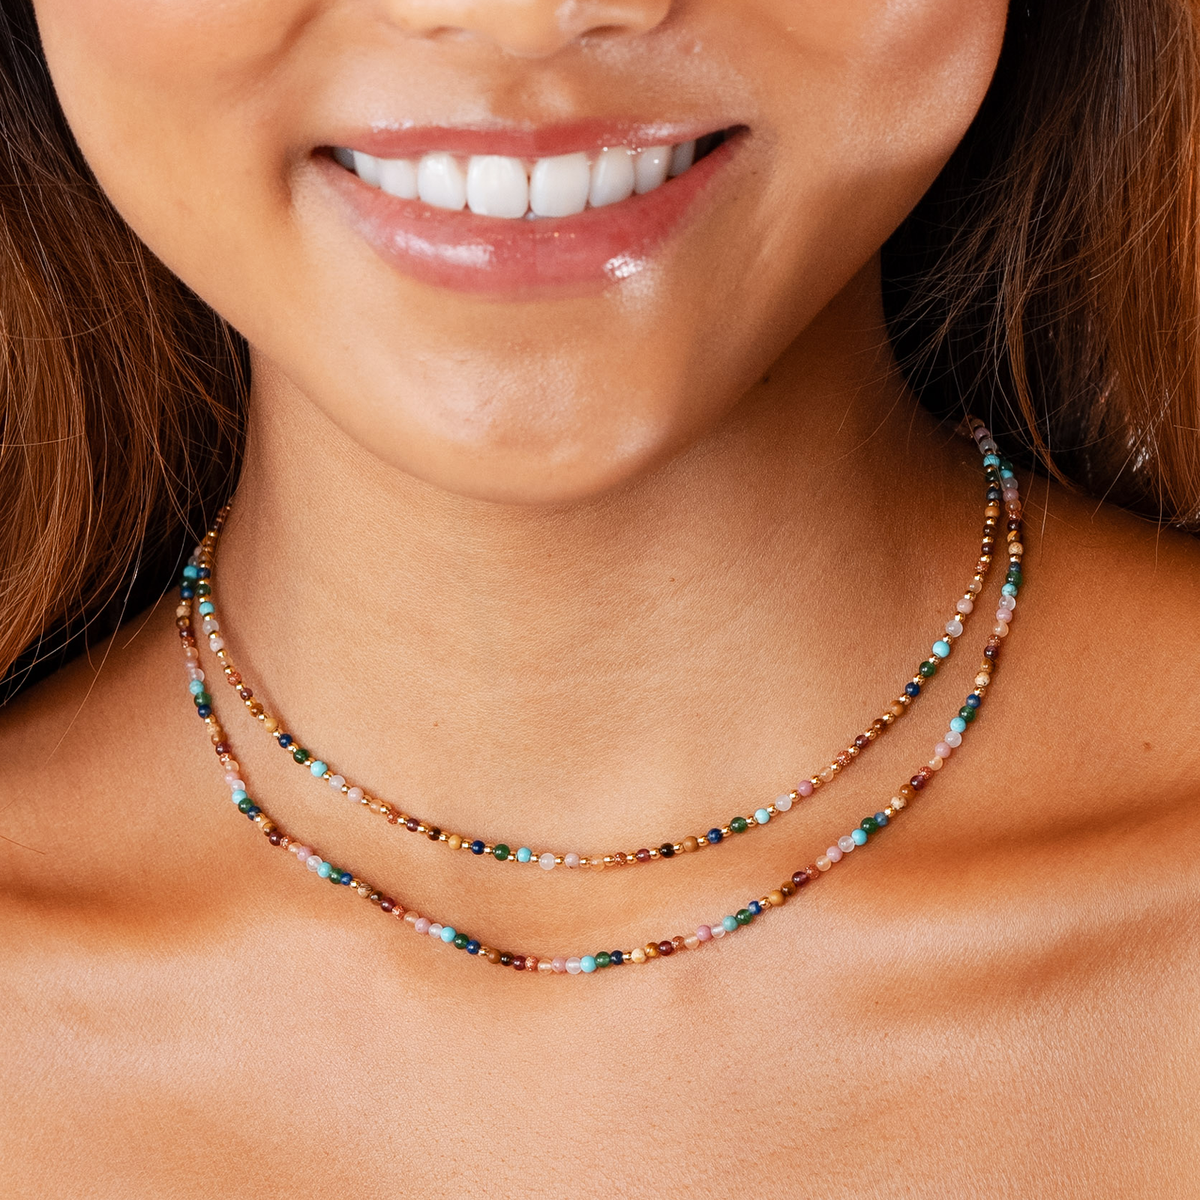 Model wearing a healing necklace stack. The necklaces include a 2mm multicolor stone and gold bead healing necklace and a 2mm multicolor stone healing necklace